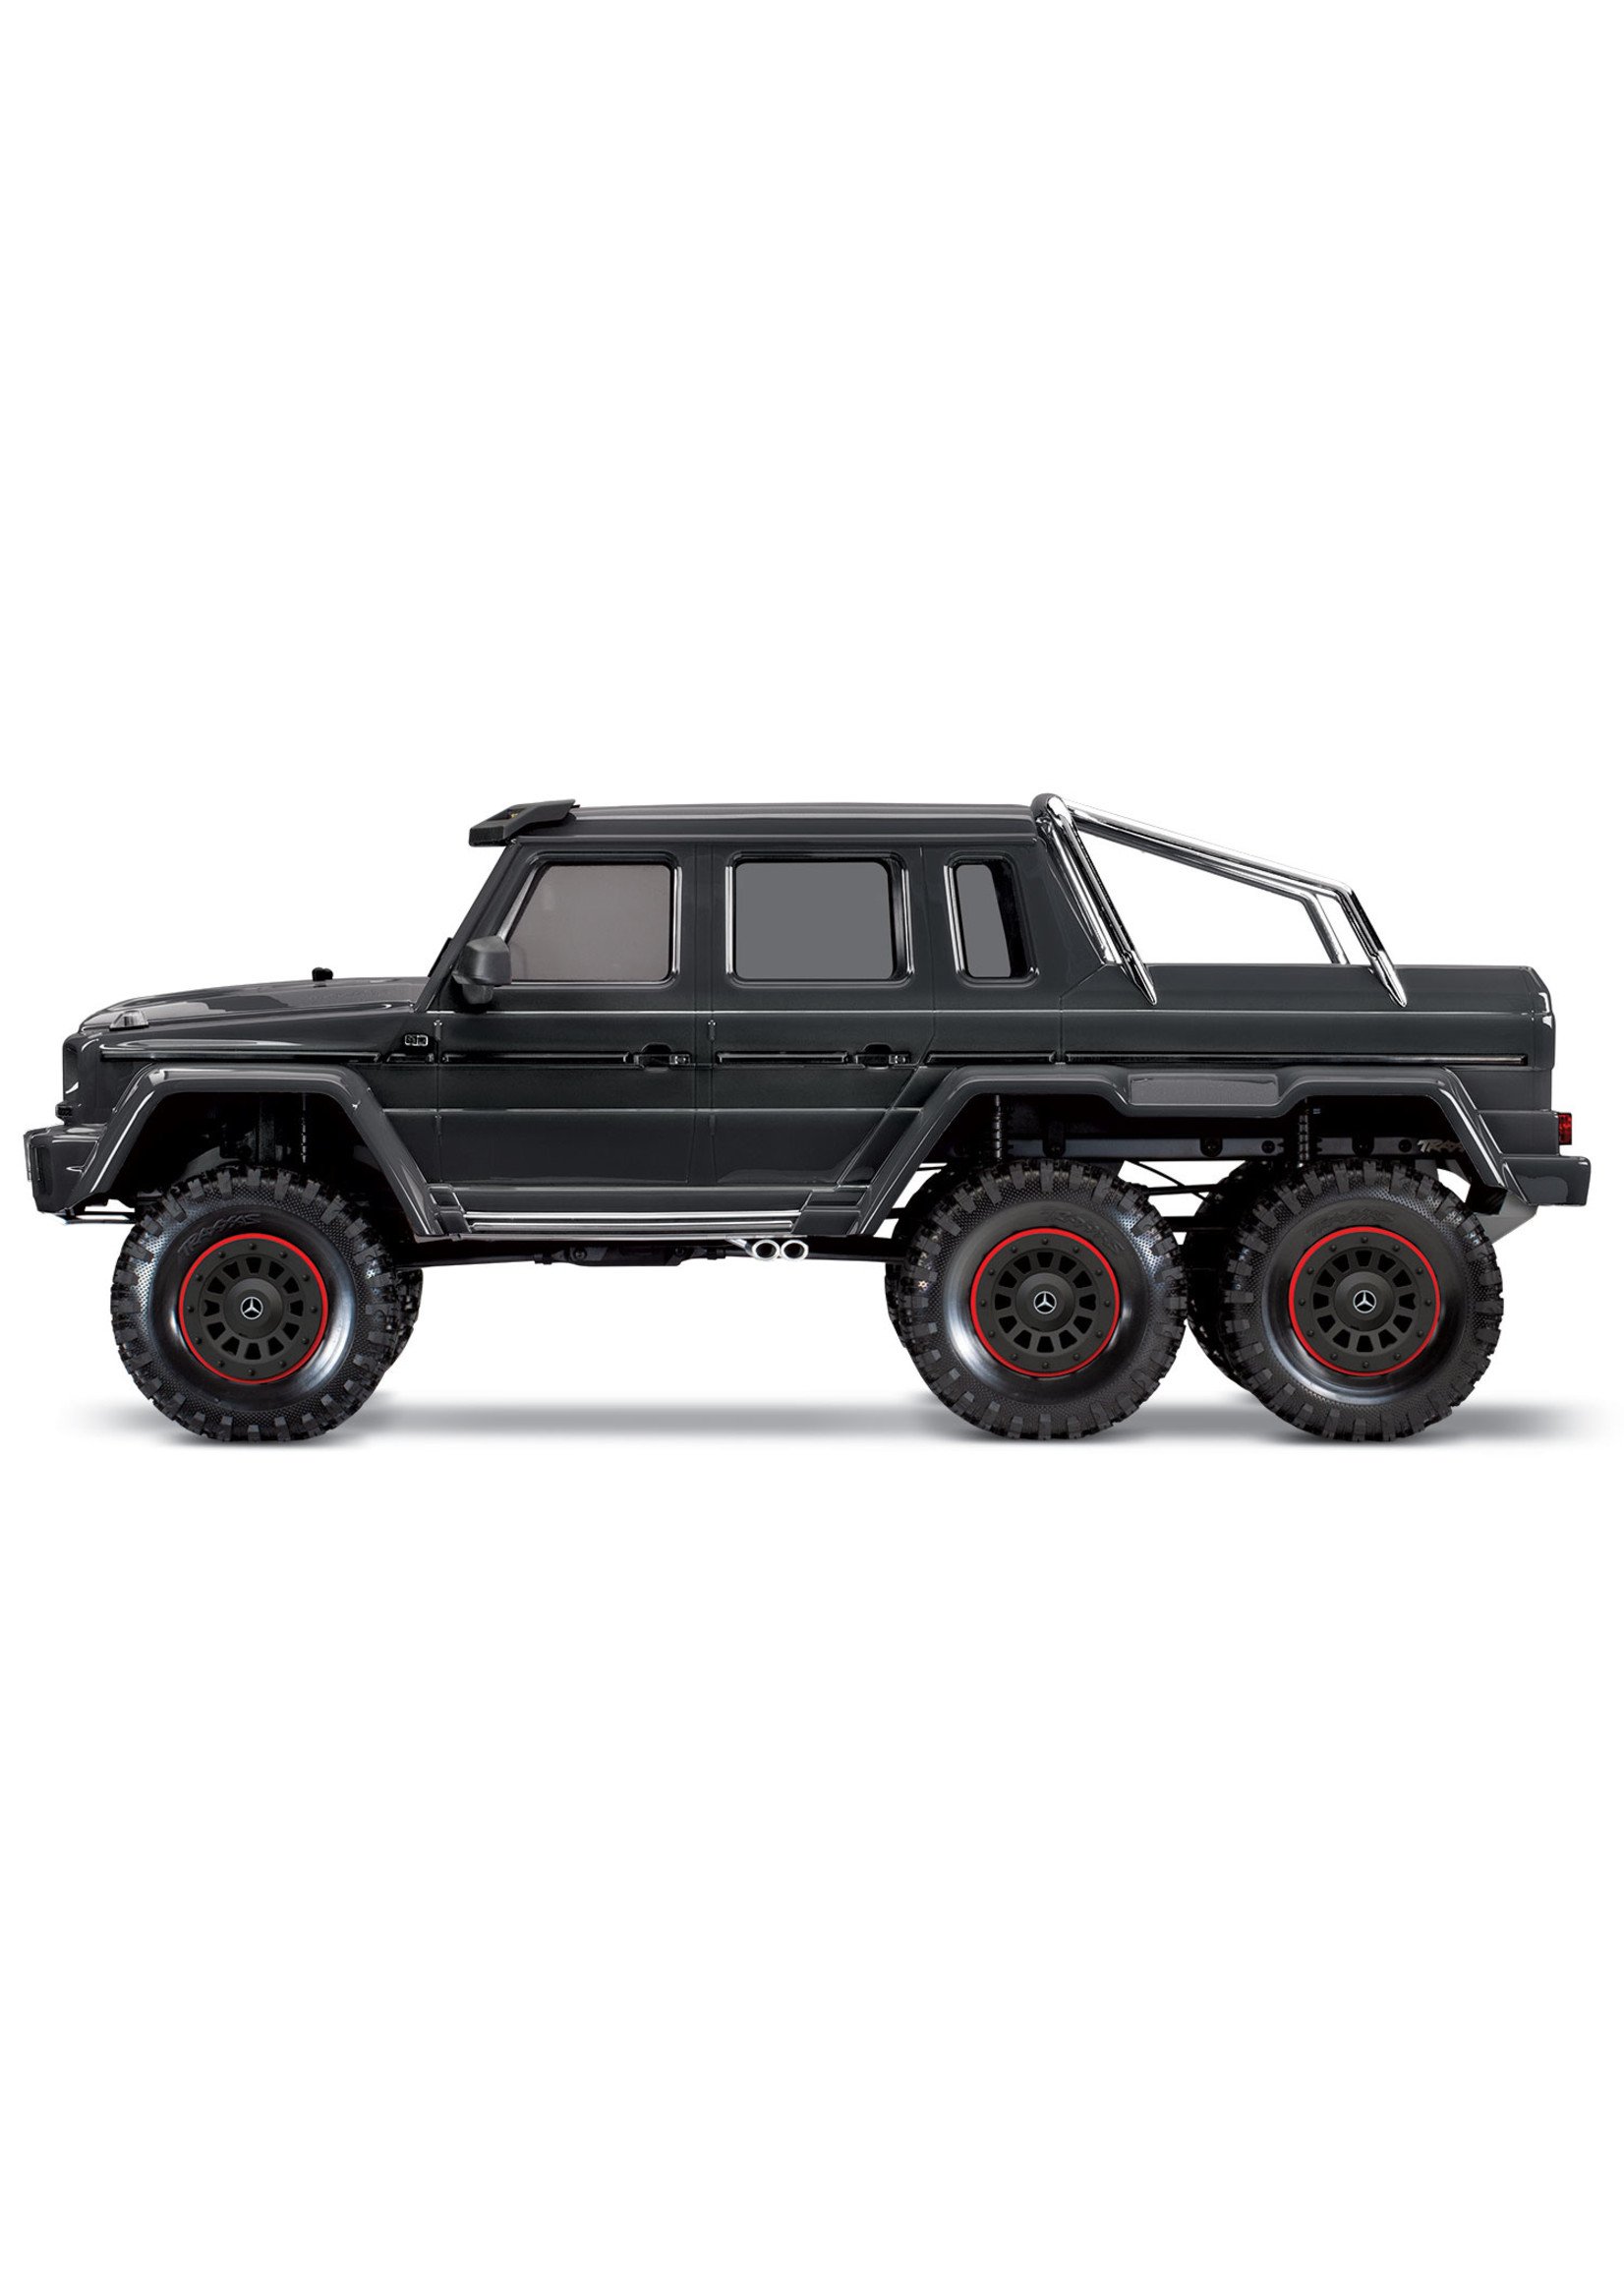 Traxxas 1/10 Mercedes-Benz G 63 AMG 6x6 RTR Scale and Trail Crawler - Black